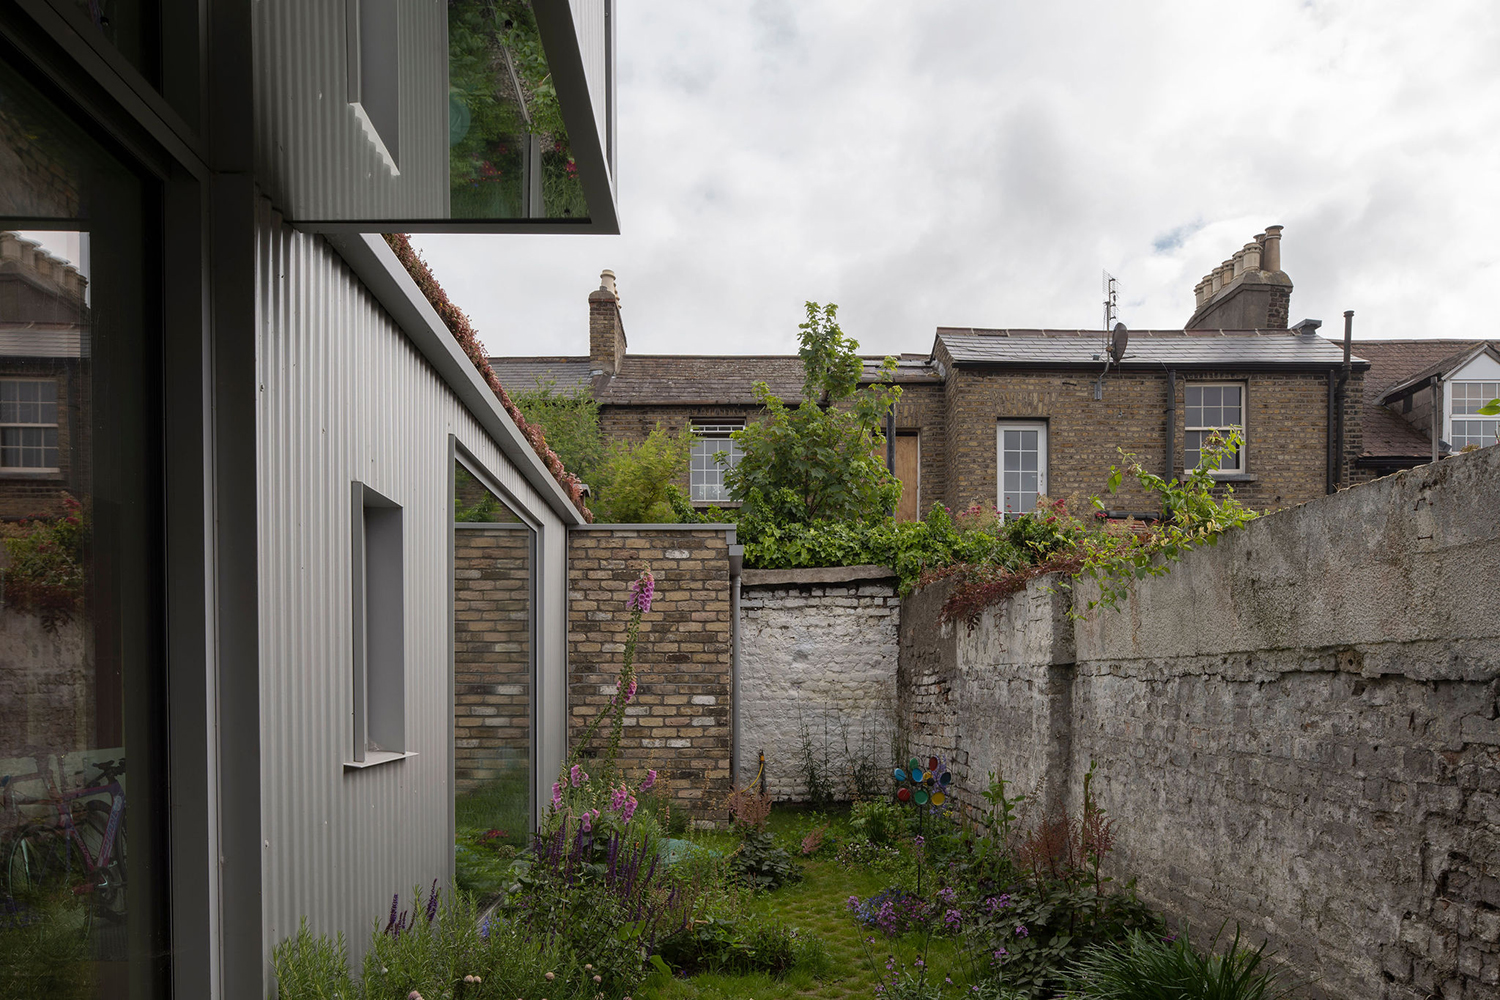 Garden area of house with stone walls with neighbourhood houses in the backgroung